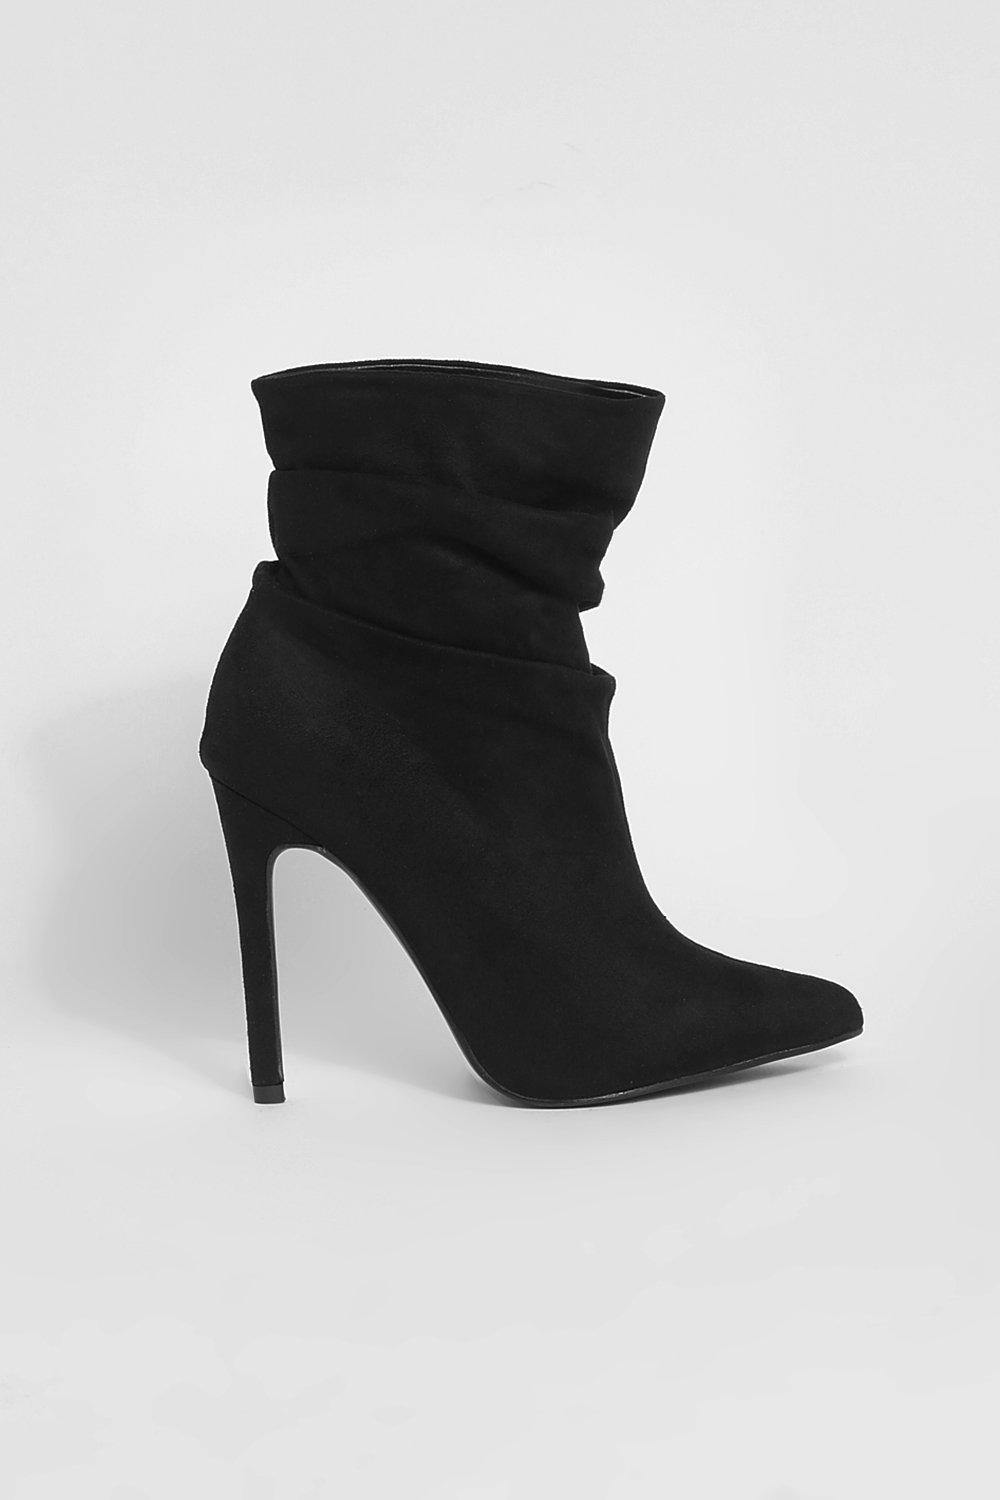 Ruched Stiletto Ankle Boots